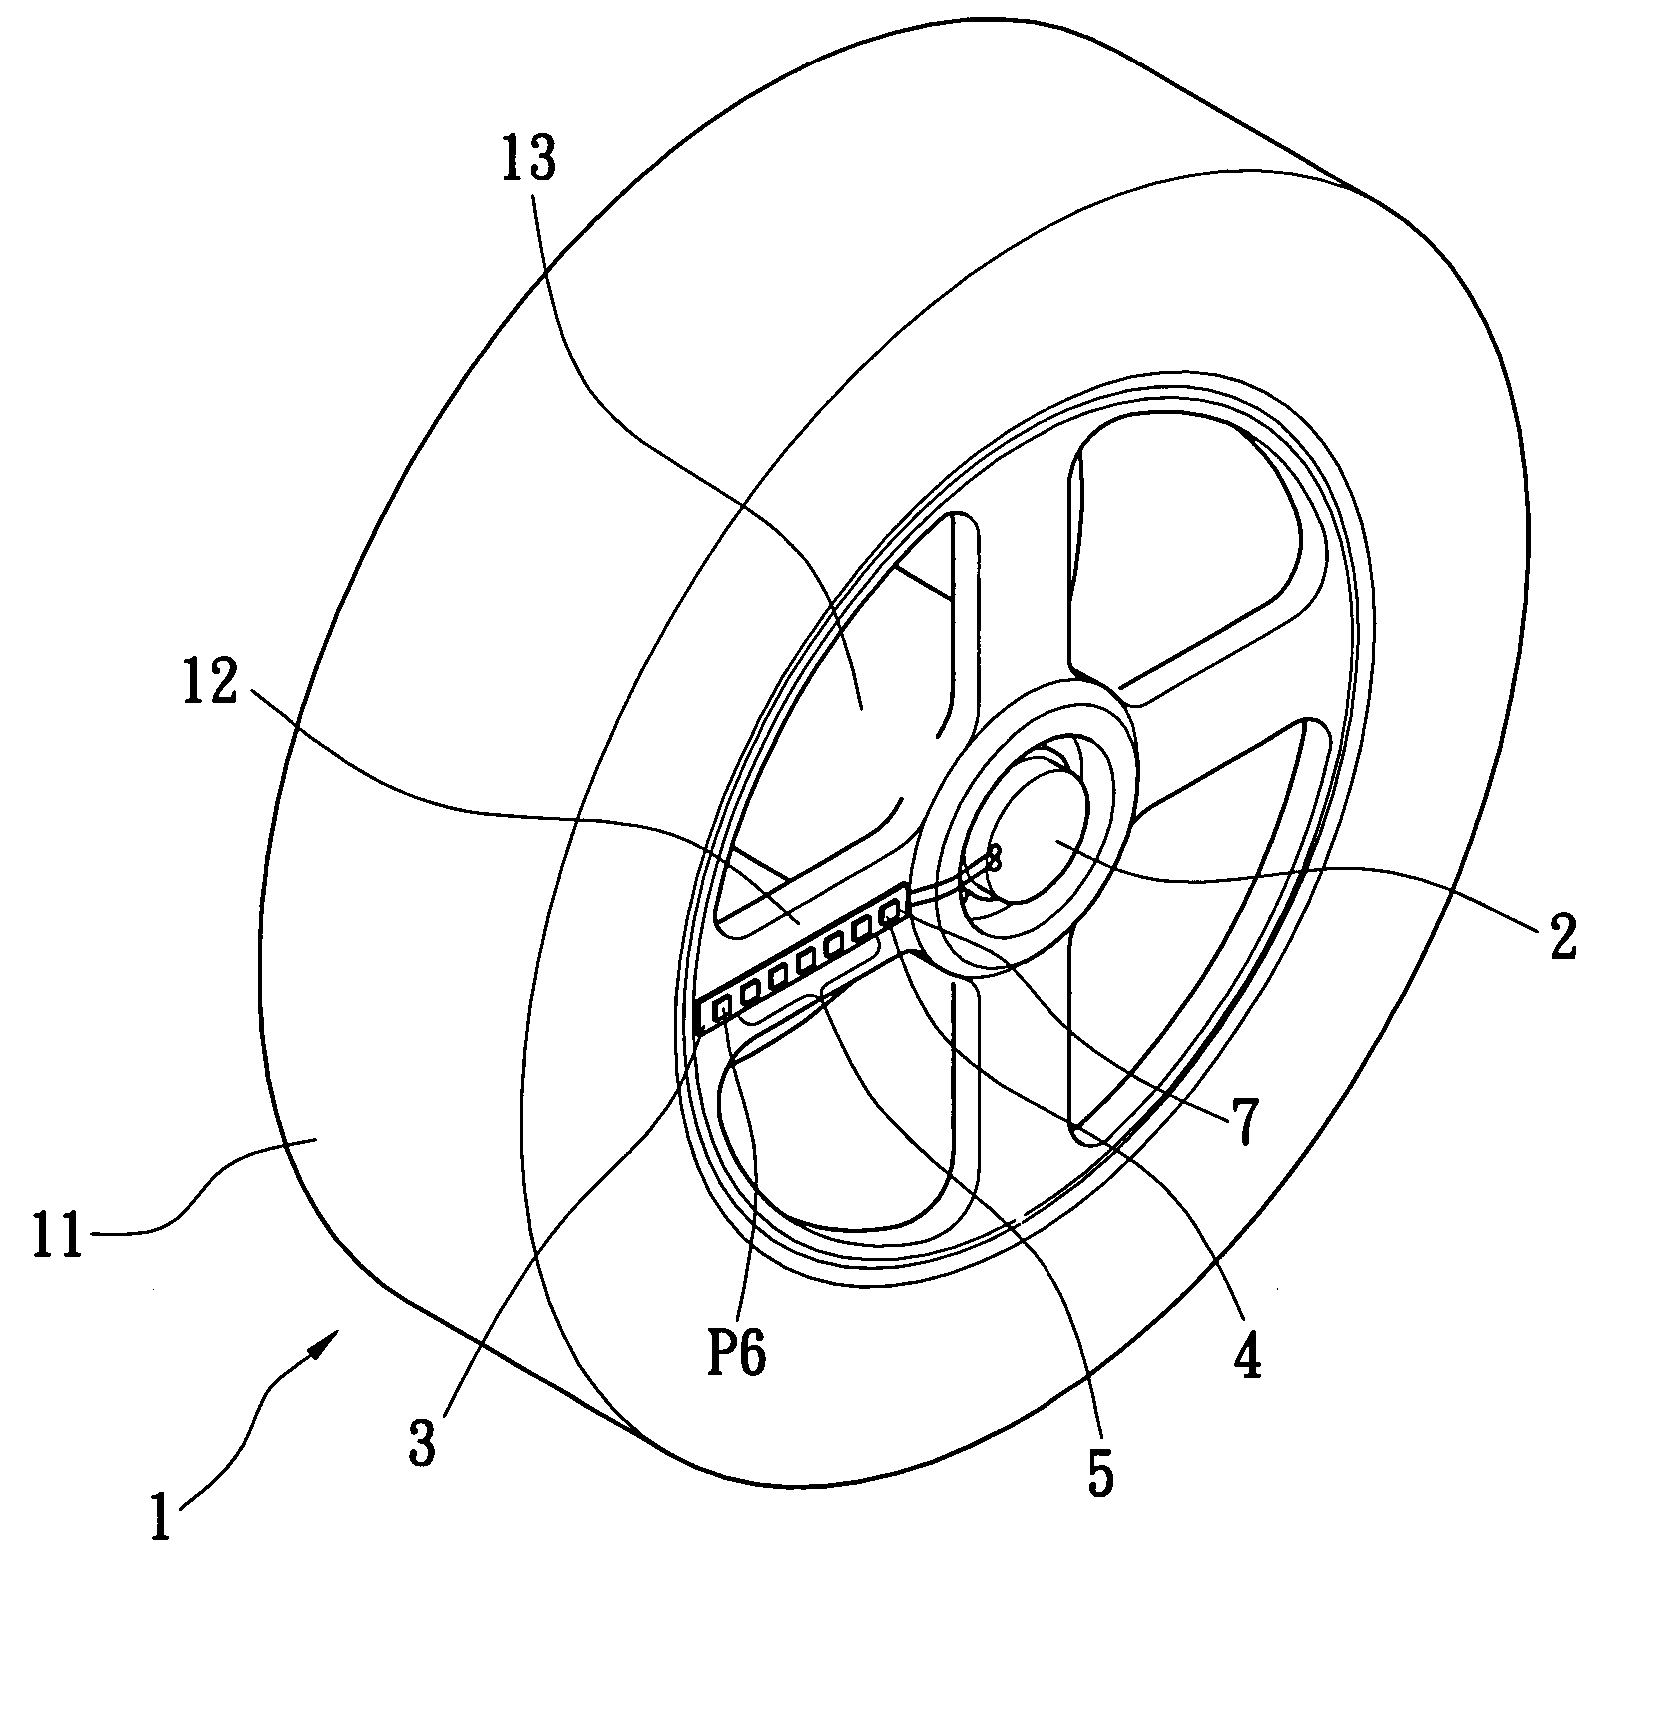 Wheel rim device with patterned light capable of automatically generating electric power